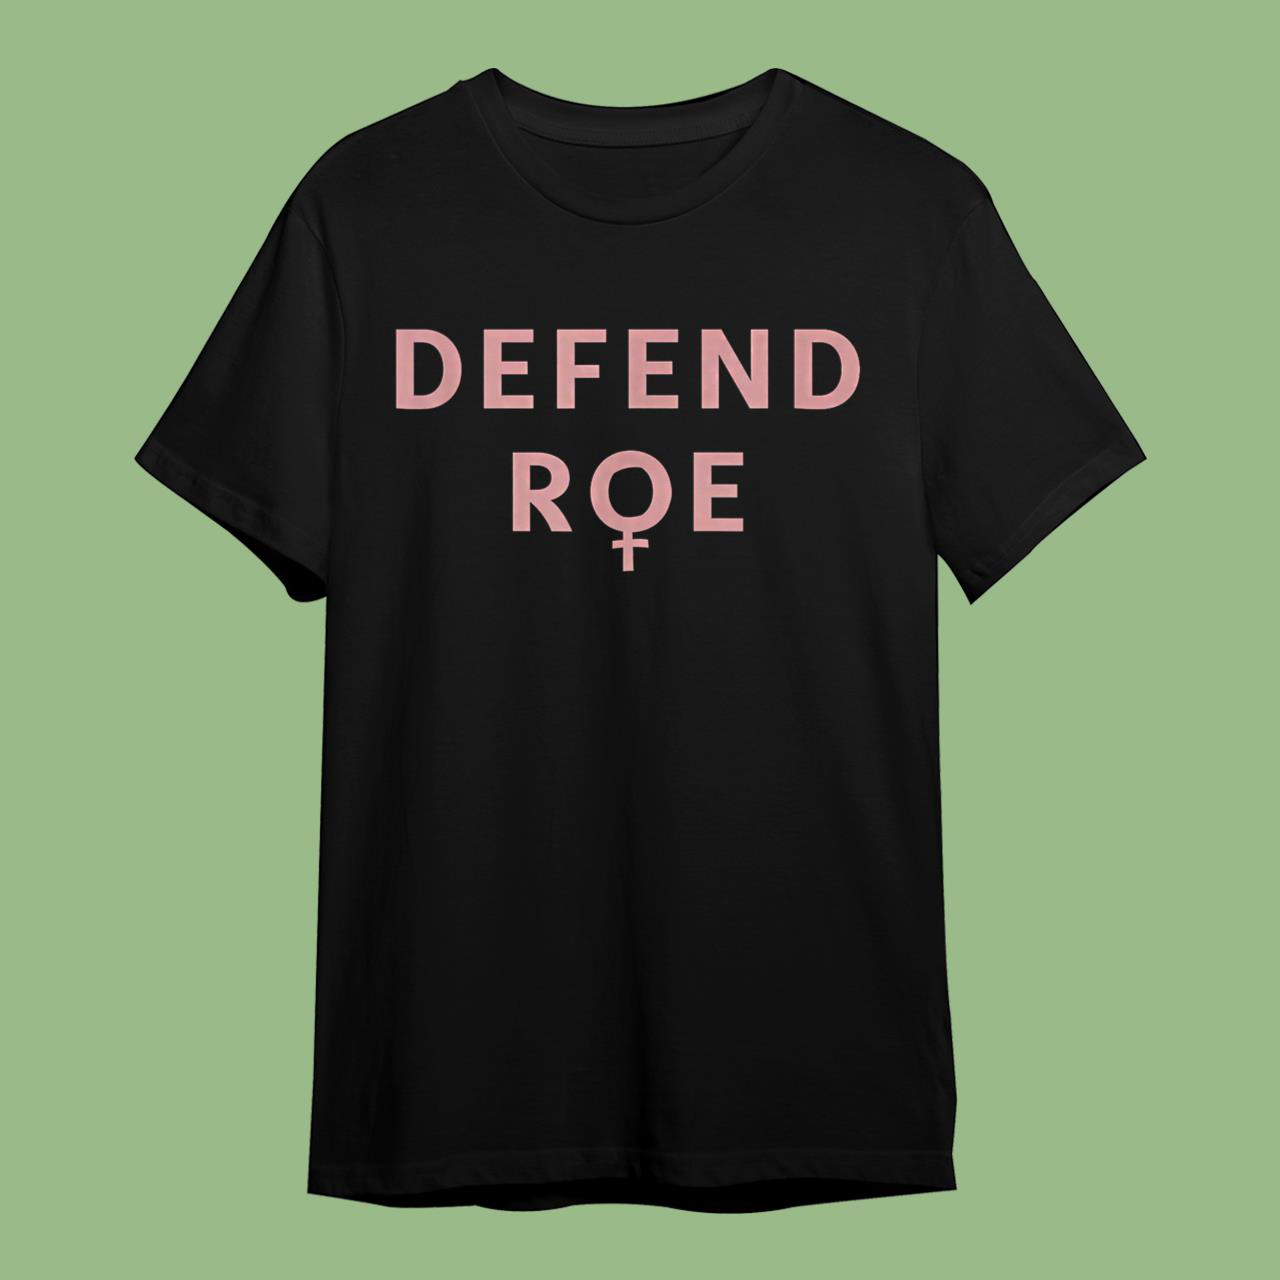 Defend Roe vs Wade – Feminist Abortion Rights Pro Choice T-Shirt